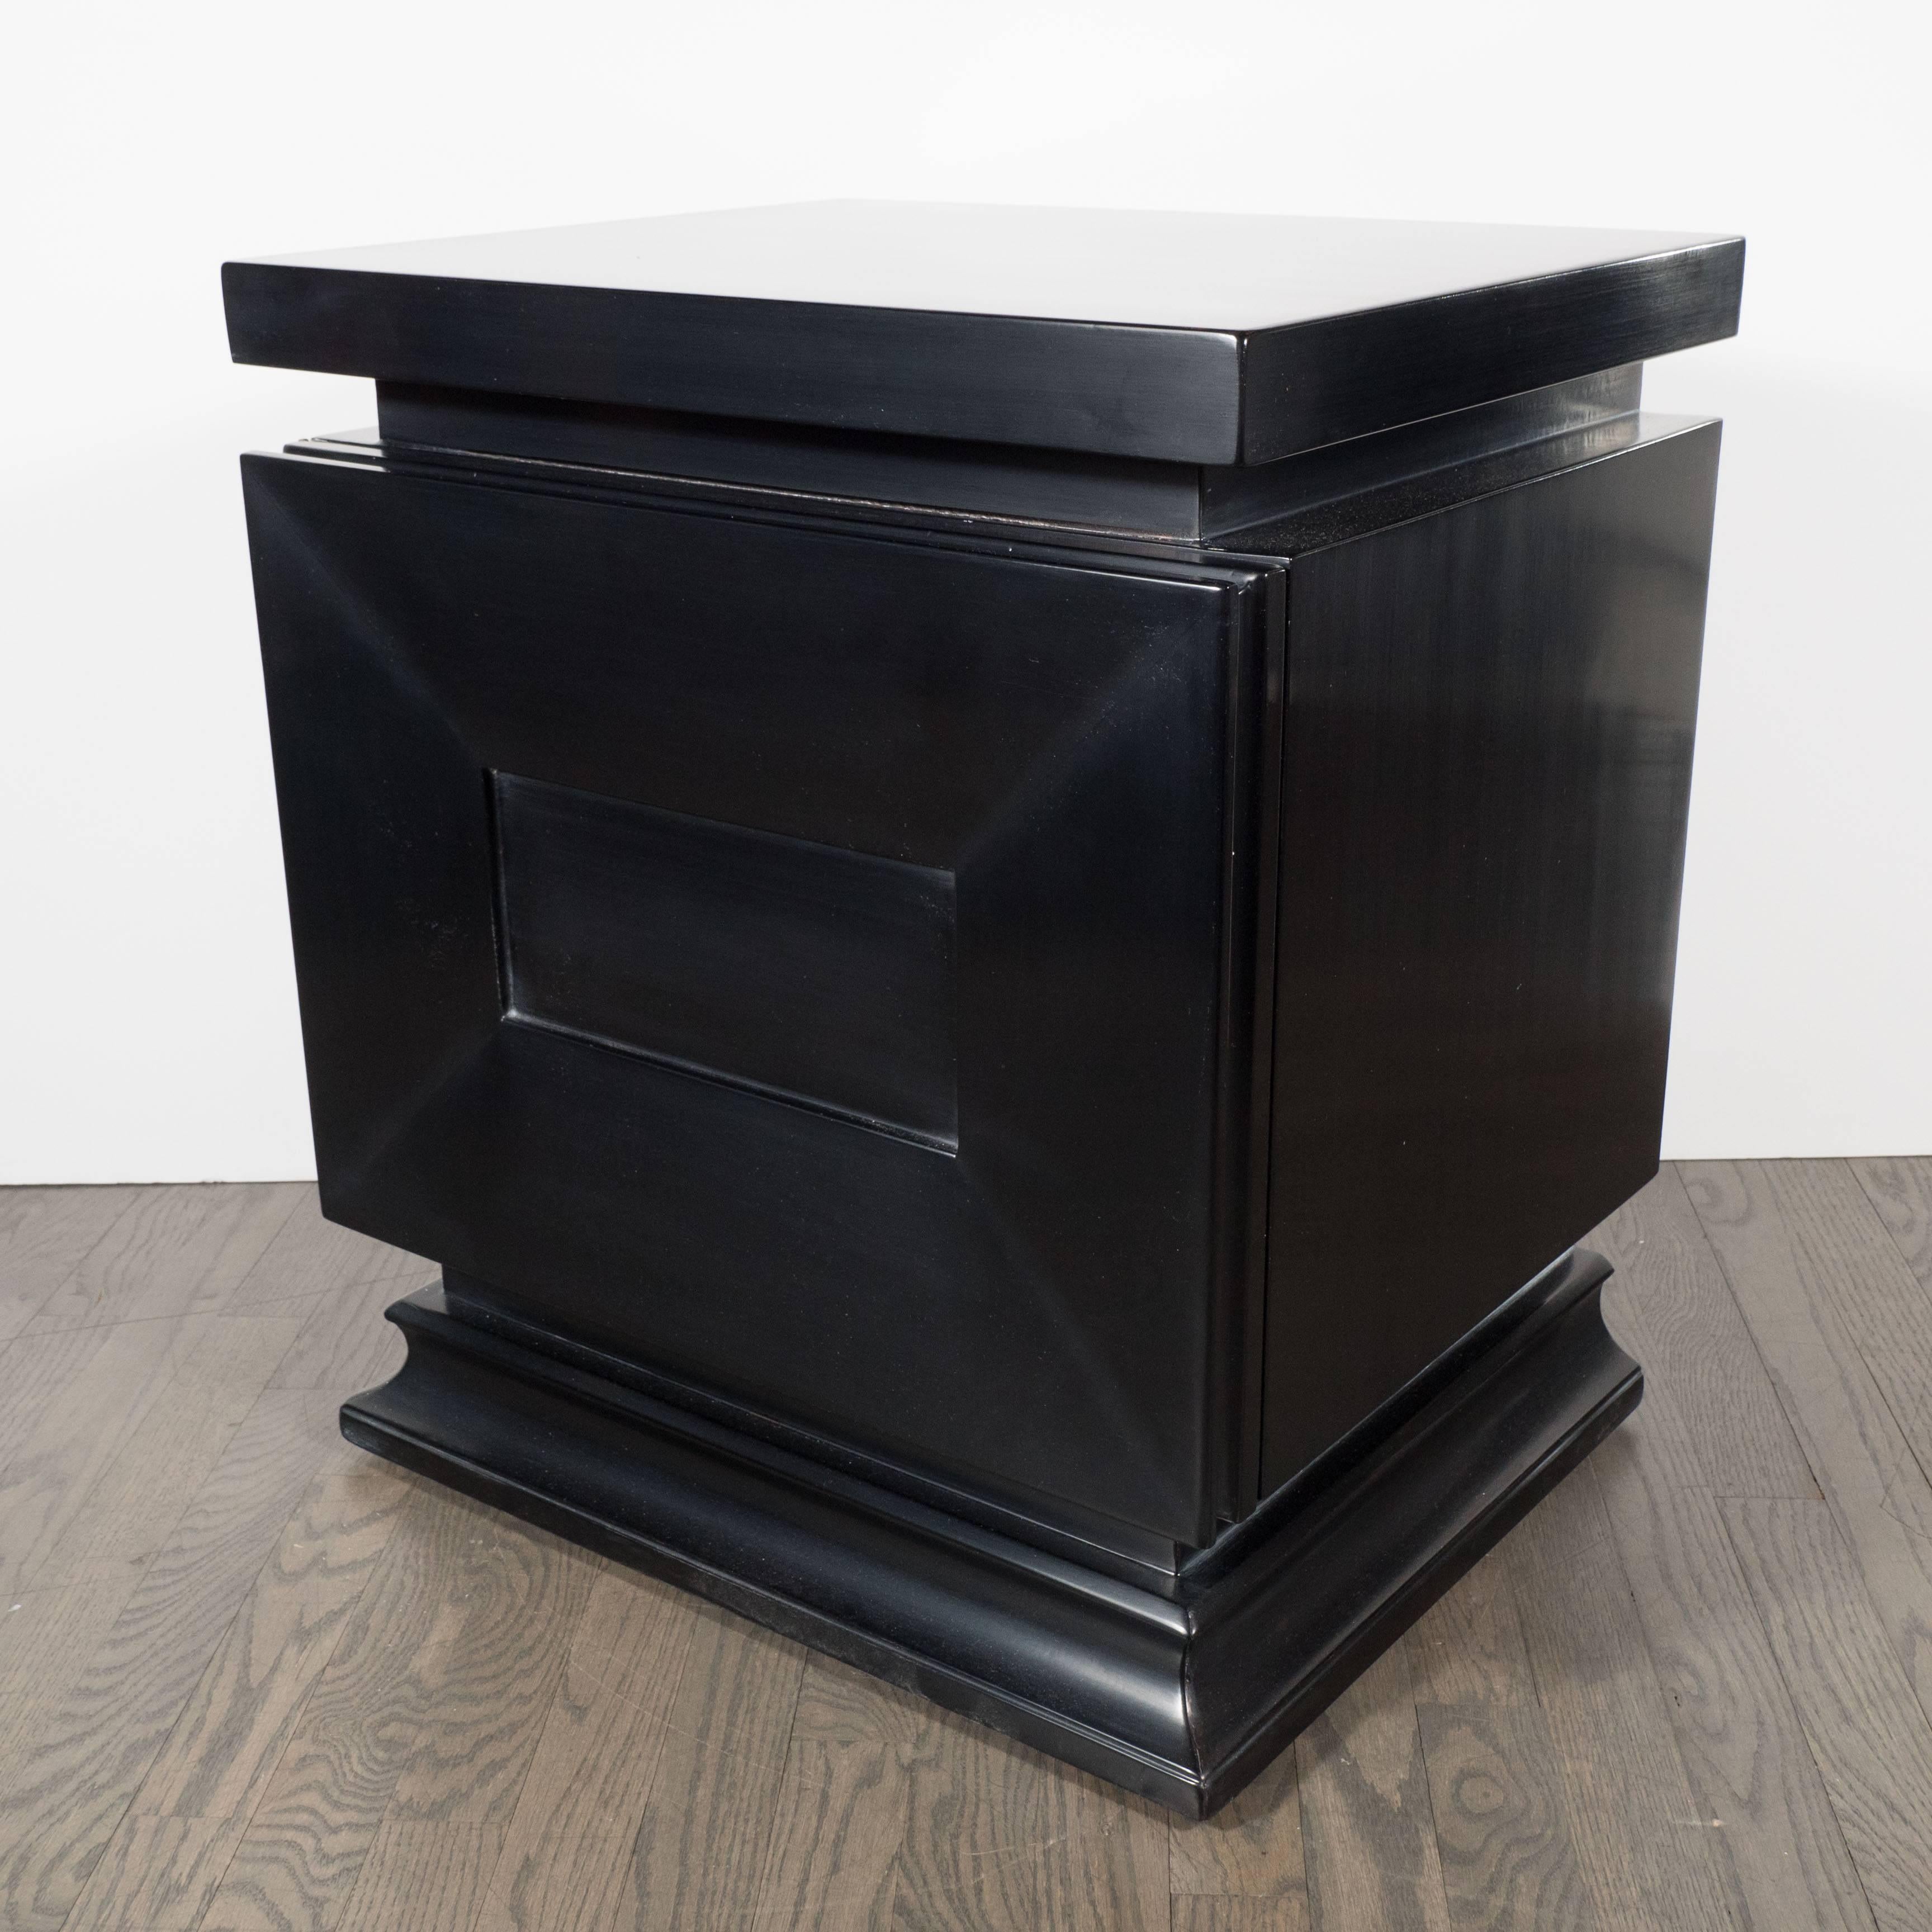 A pair of Mid-Century modernist nightstands or end tables in hand-rubbed ebonized walnut, featuring a shadowbox design. Stepped bases support shadowbox segmented doors which are supported by brass hinges, which each door opening outward to reveal a